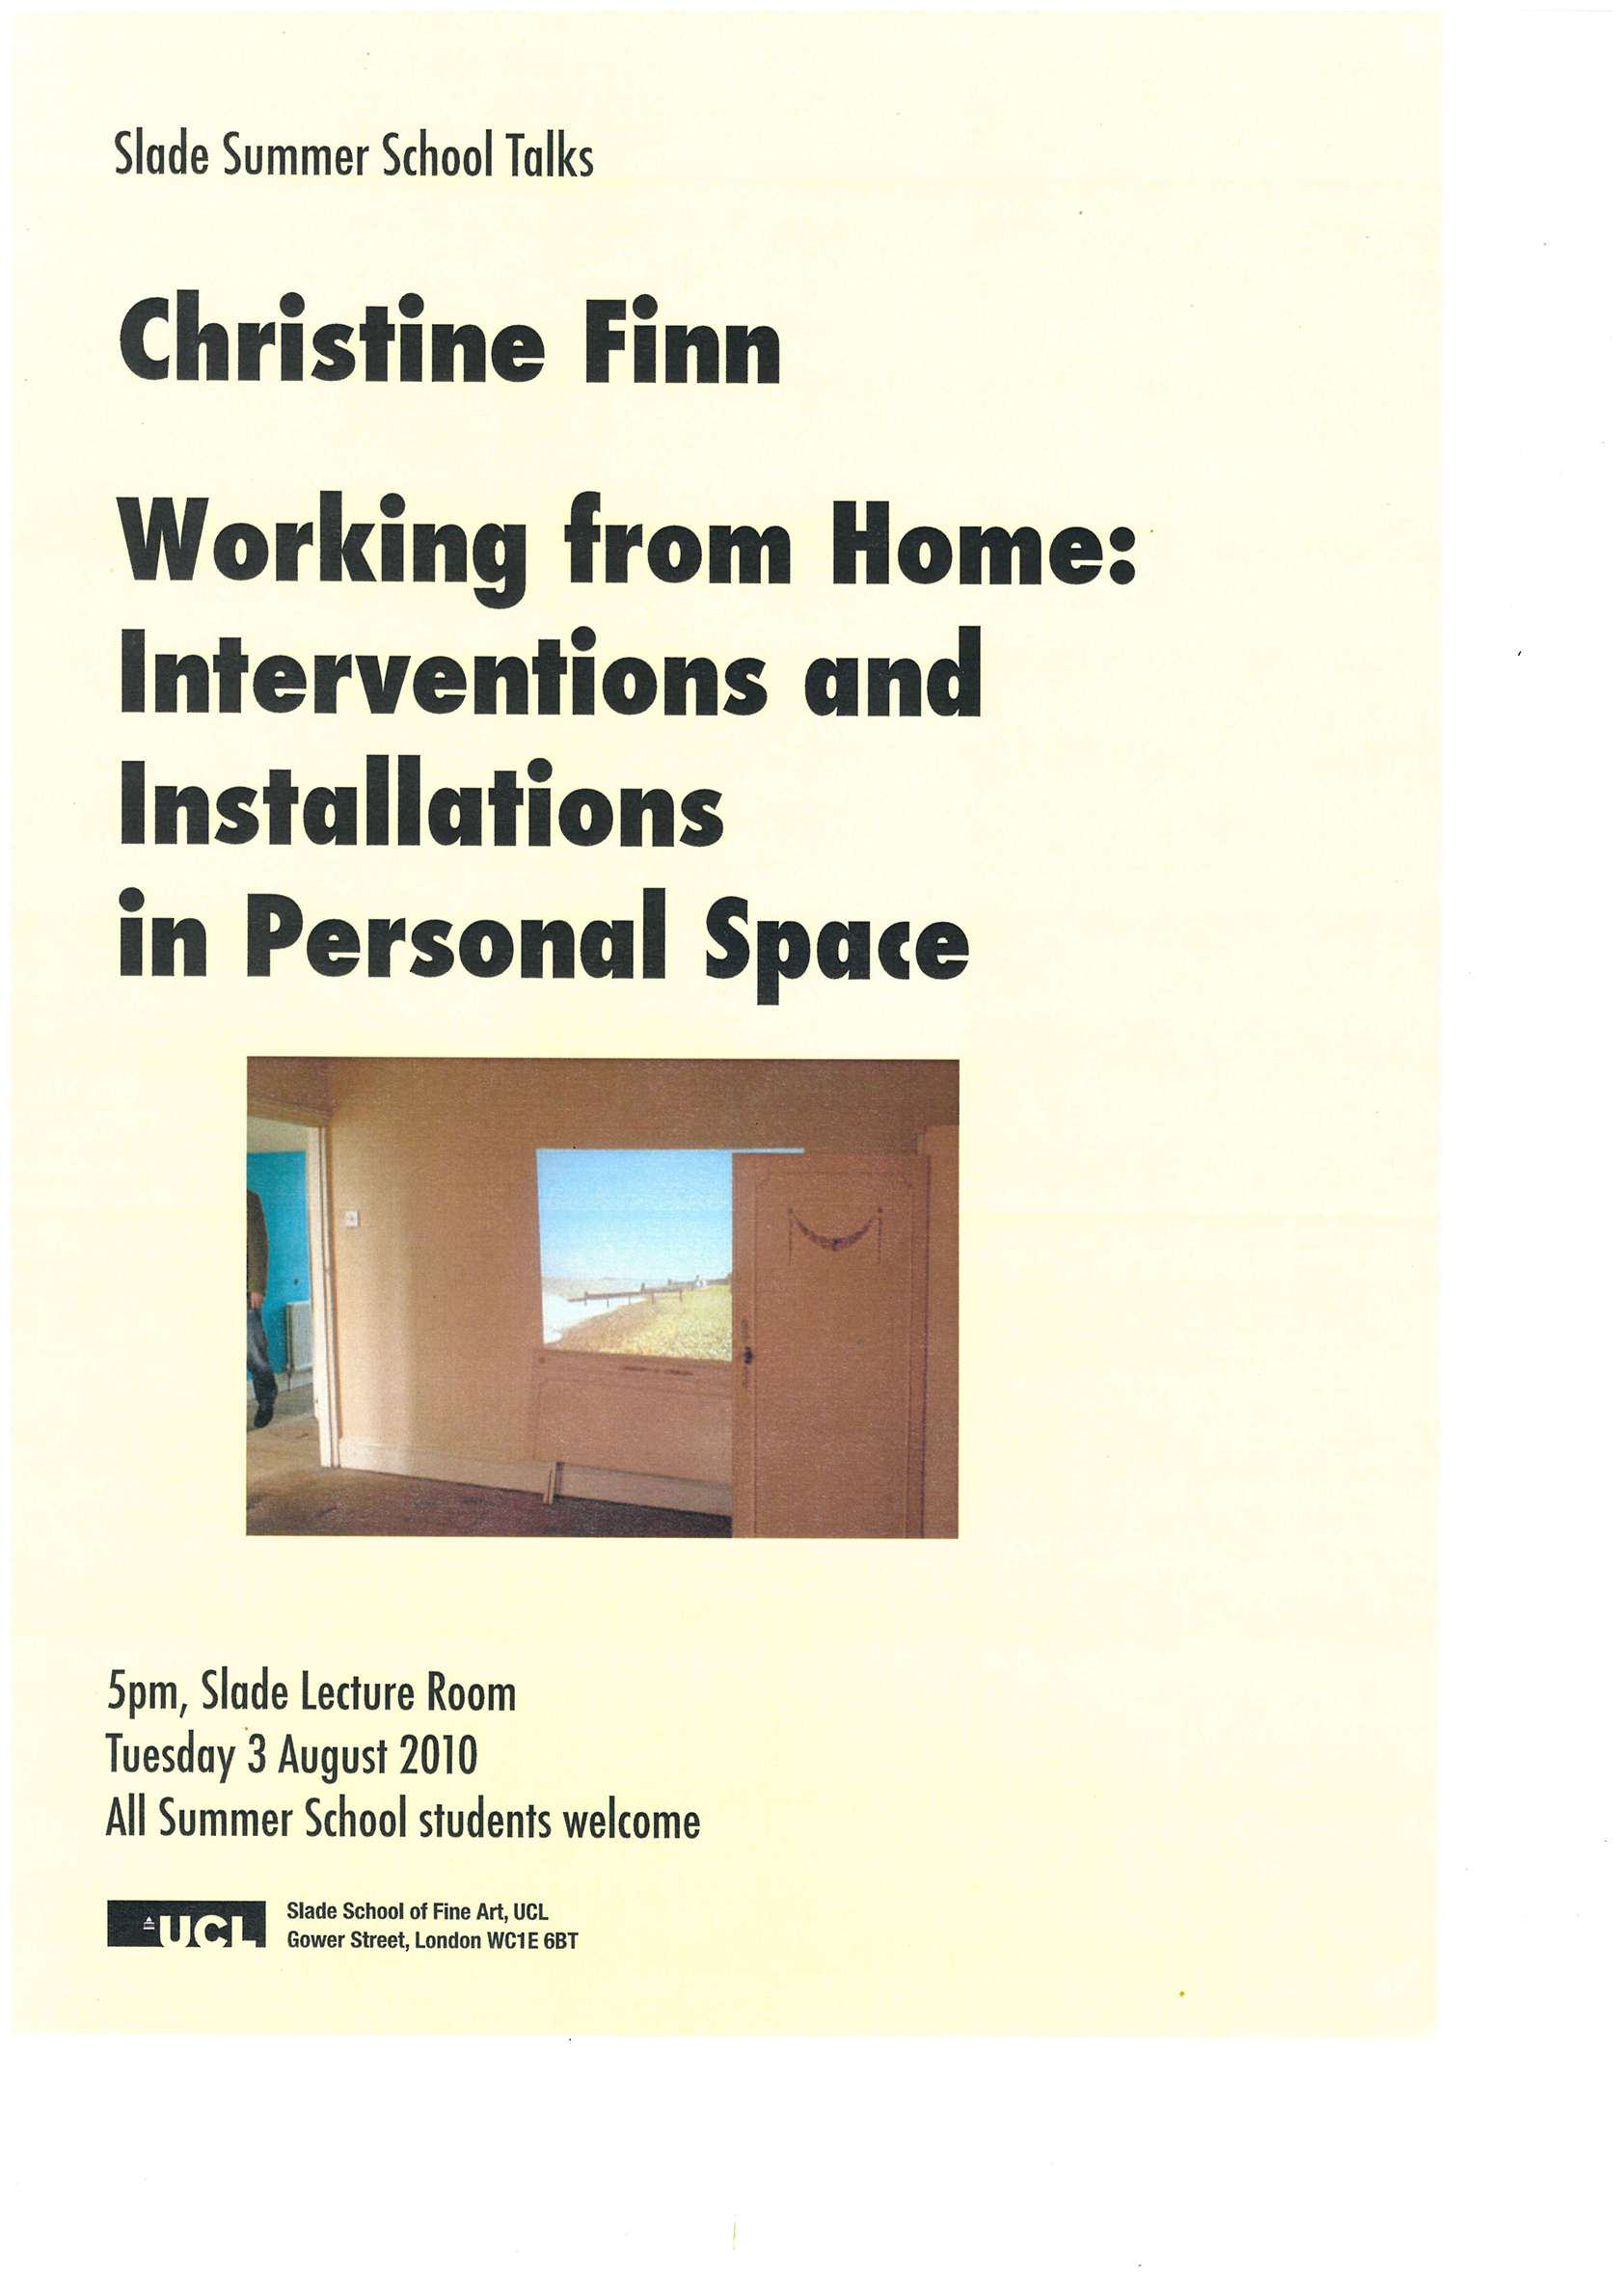 Summer School poster: Christine Finn, Workng from Home: Interventions and Installations in Personal Space, 3 August 2010